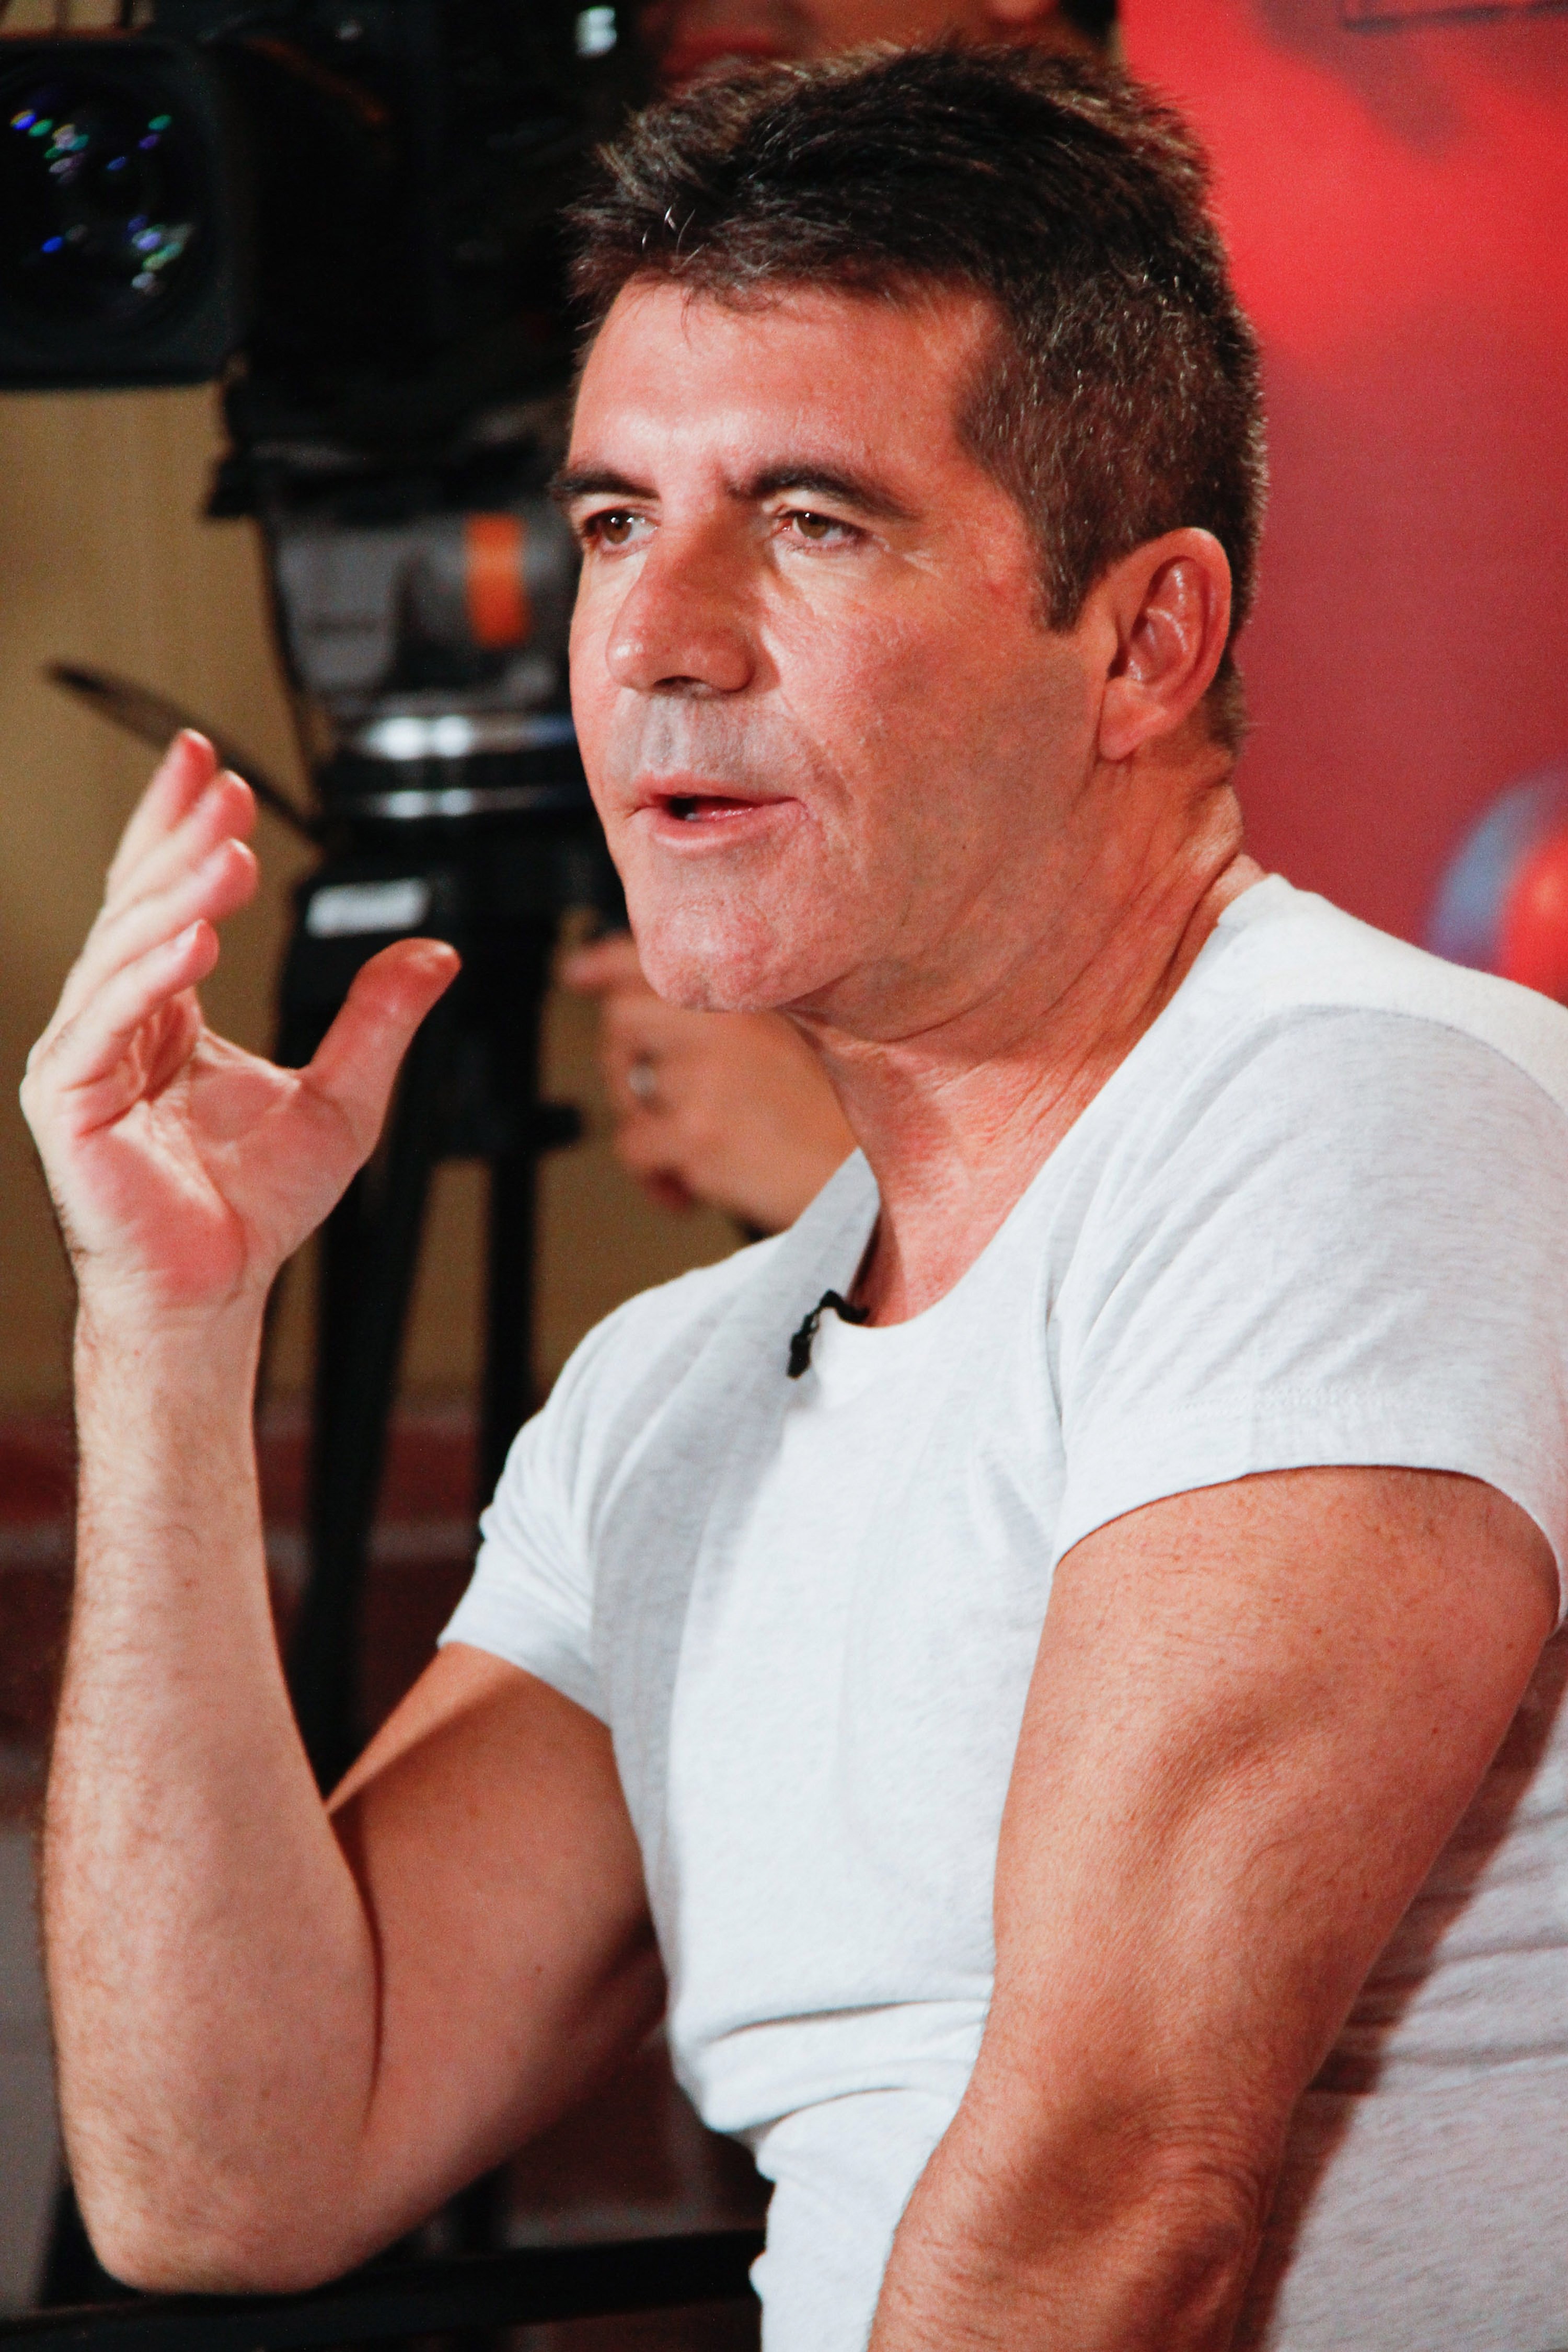 "The X Factor" Judge Simon Cowell attends the "The X Factor" Judges press conference at Nassau Veterans Memorial Coliseum on June 20, 2013 in Uniondale, New York | Source: Getty Images 